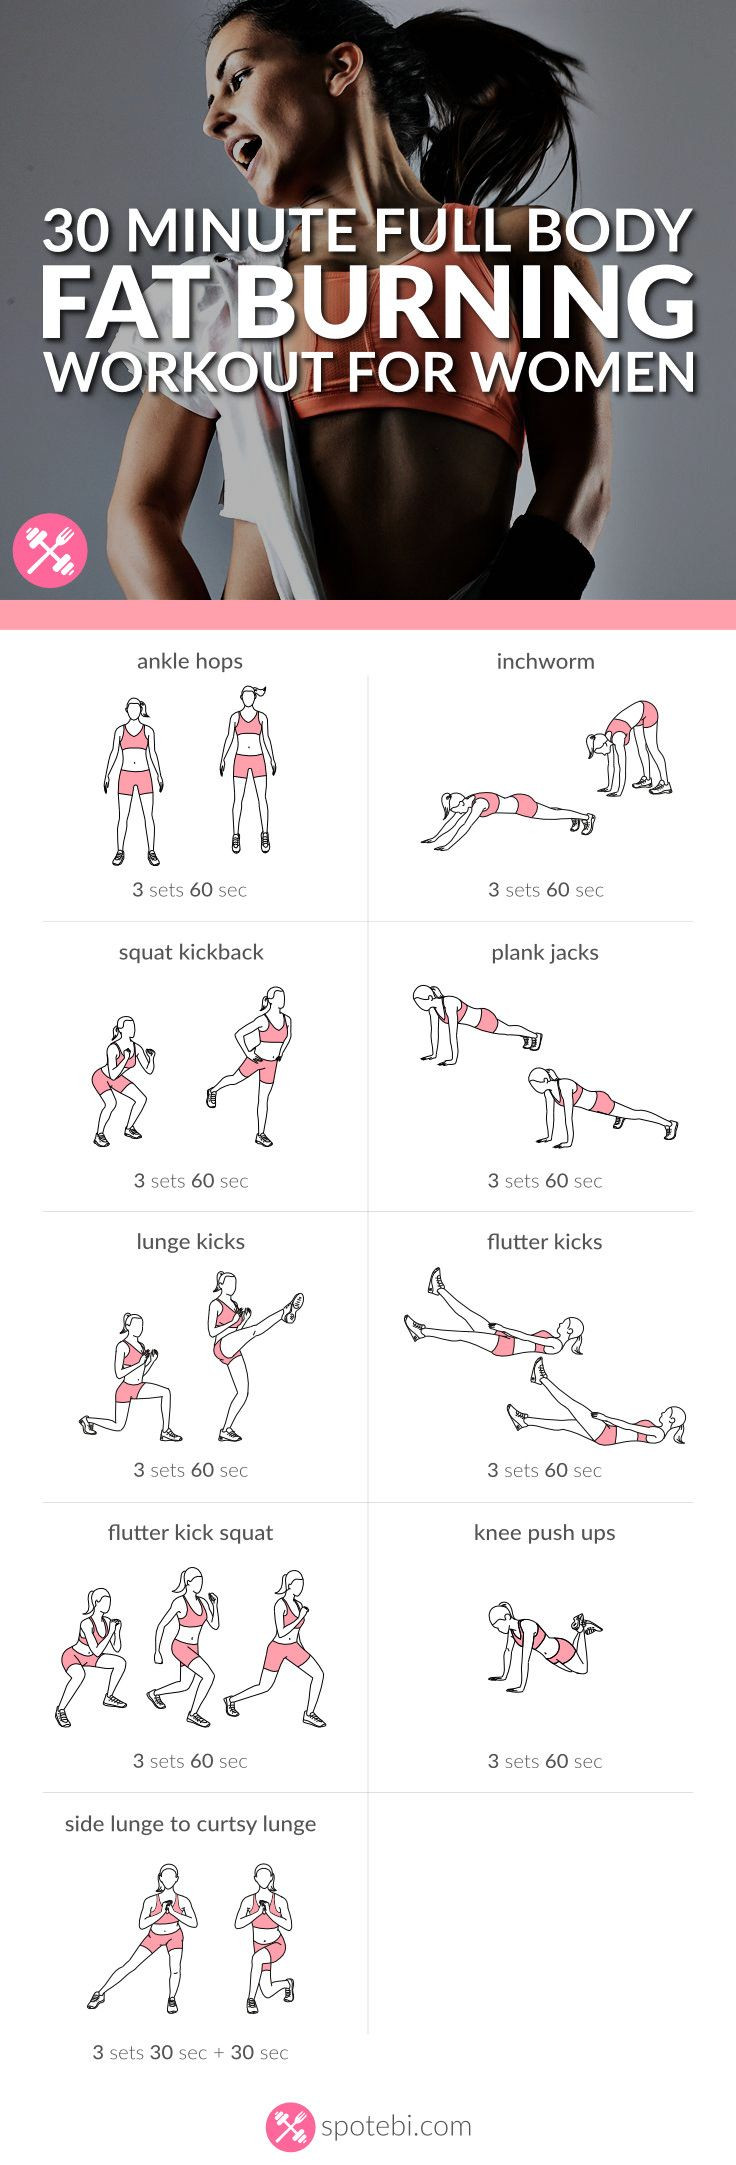 Fat Burning Workout For Men Full Body
 Pin on Getting in shape